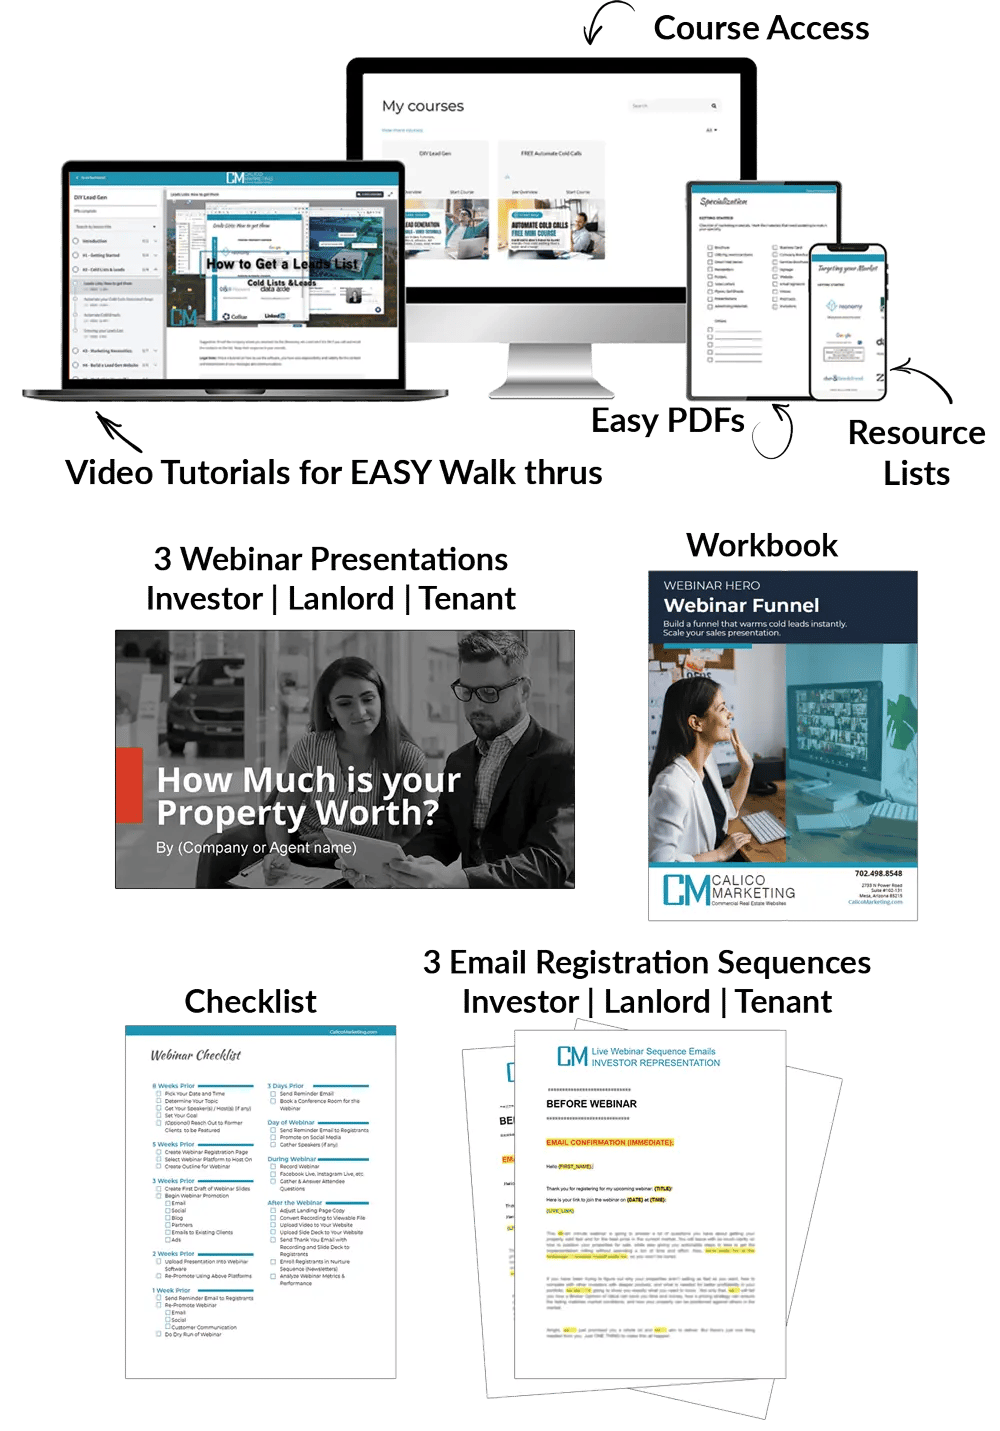 Mockup of materials included in the Hero Package. Shows the video tutorials, easy PDF downloads, slide decks, webinar funnel checklist, workbook with webinar funnel walk through, email registration series, and more.